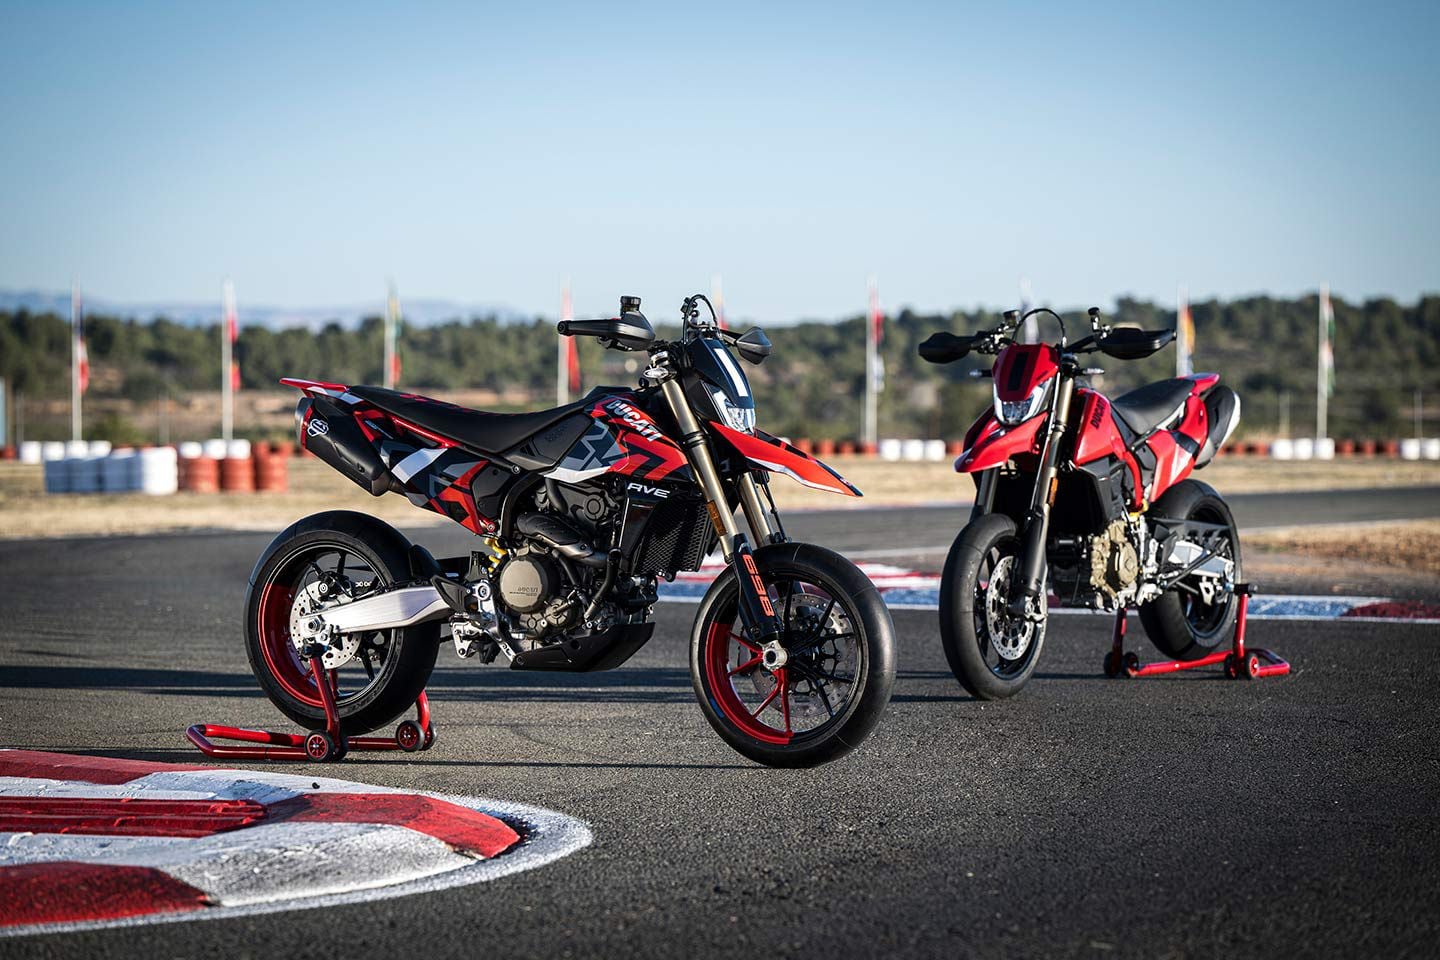 The Hypermotard 698 Mono lineup consists of two bikes: a base model ($12,995) and quickshifter-equipped RVE ($14,495), which also gets a special Ducati graphic treatment.